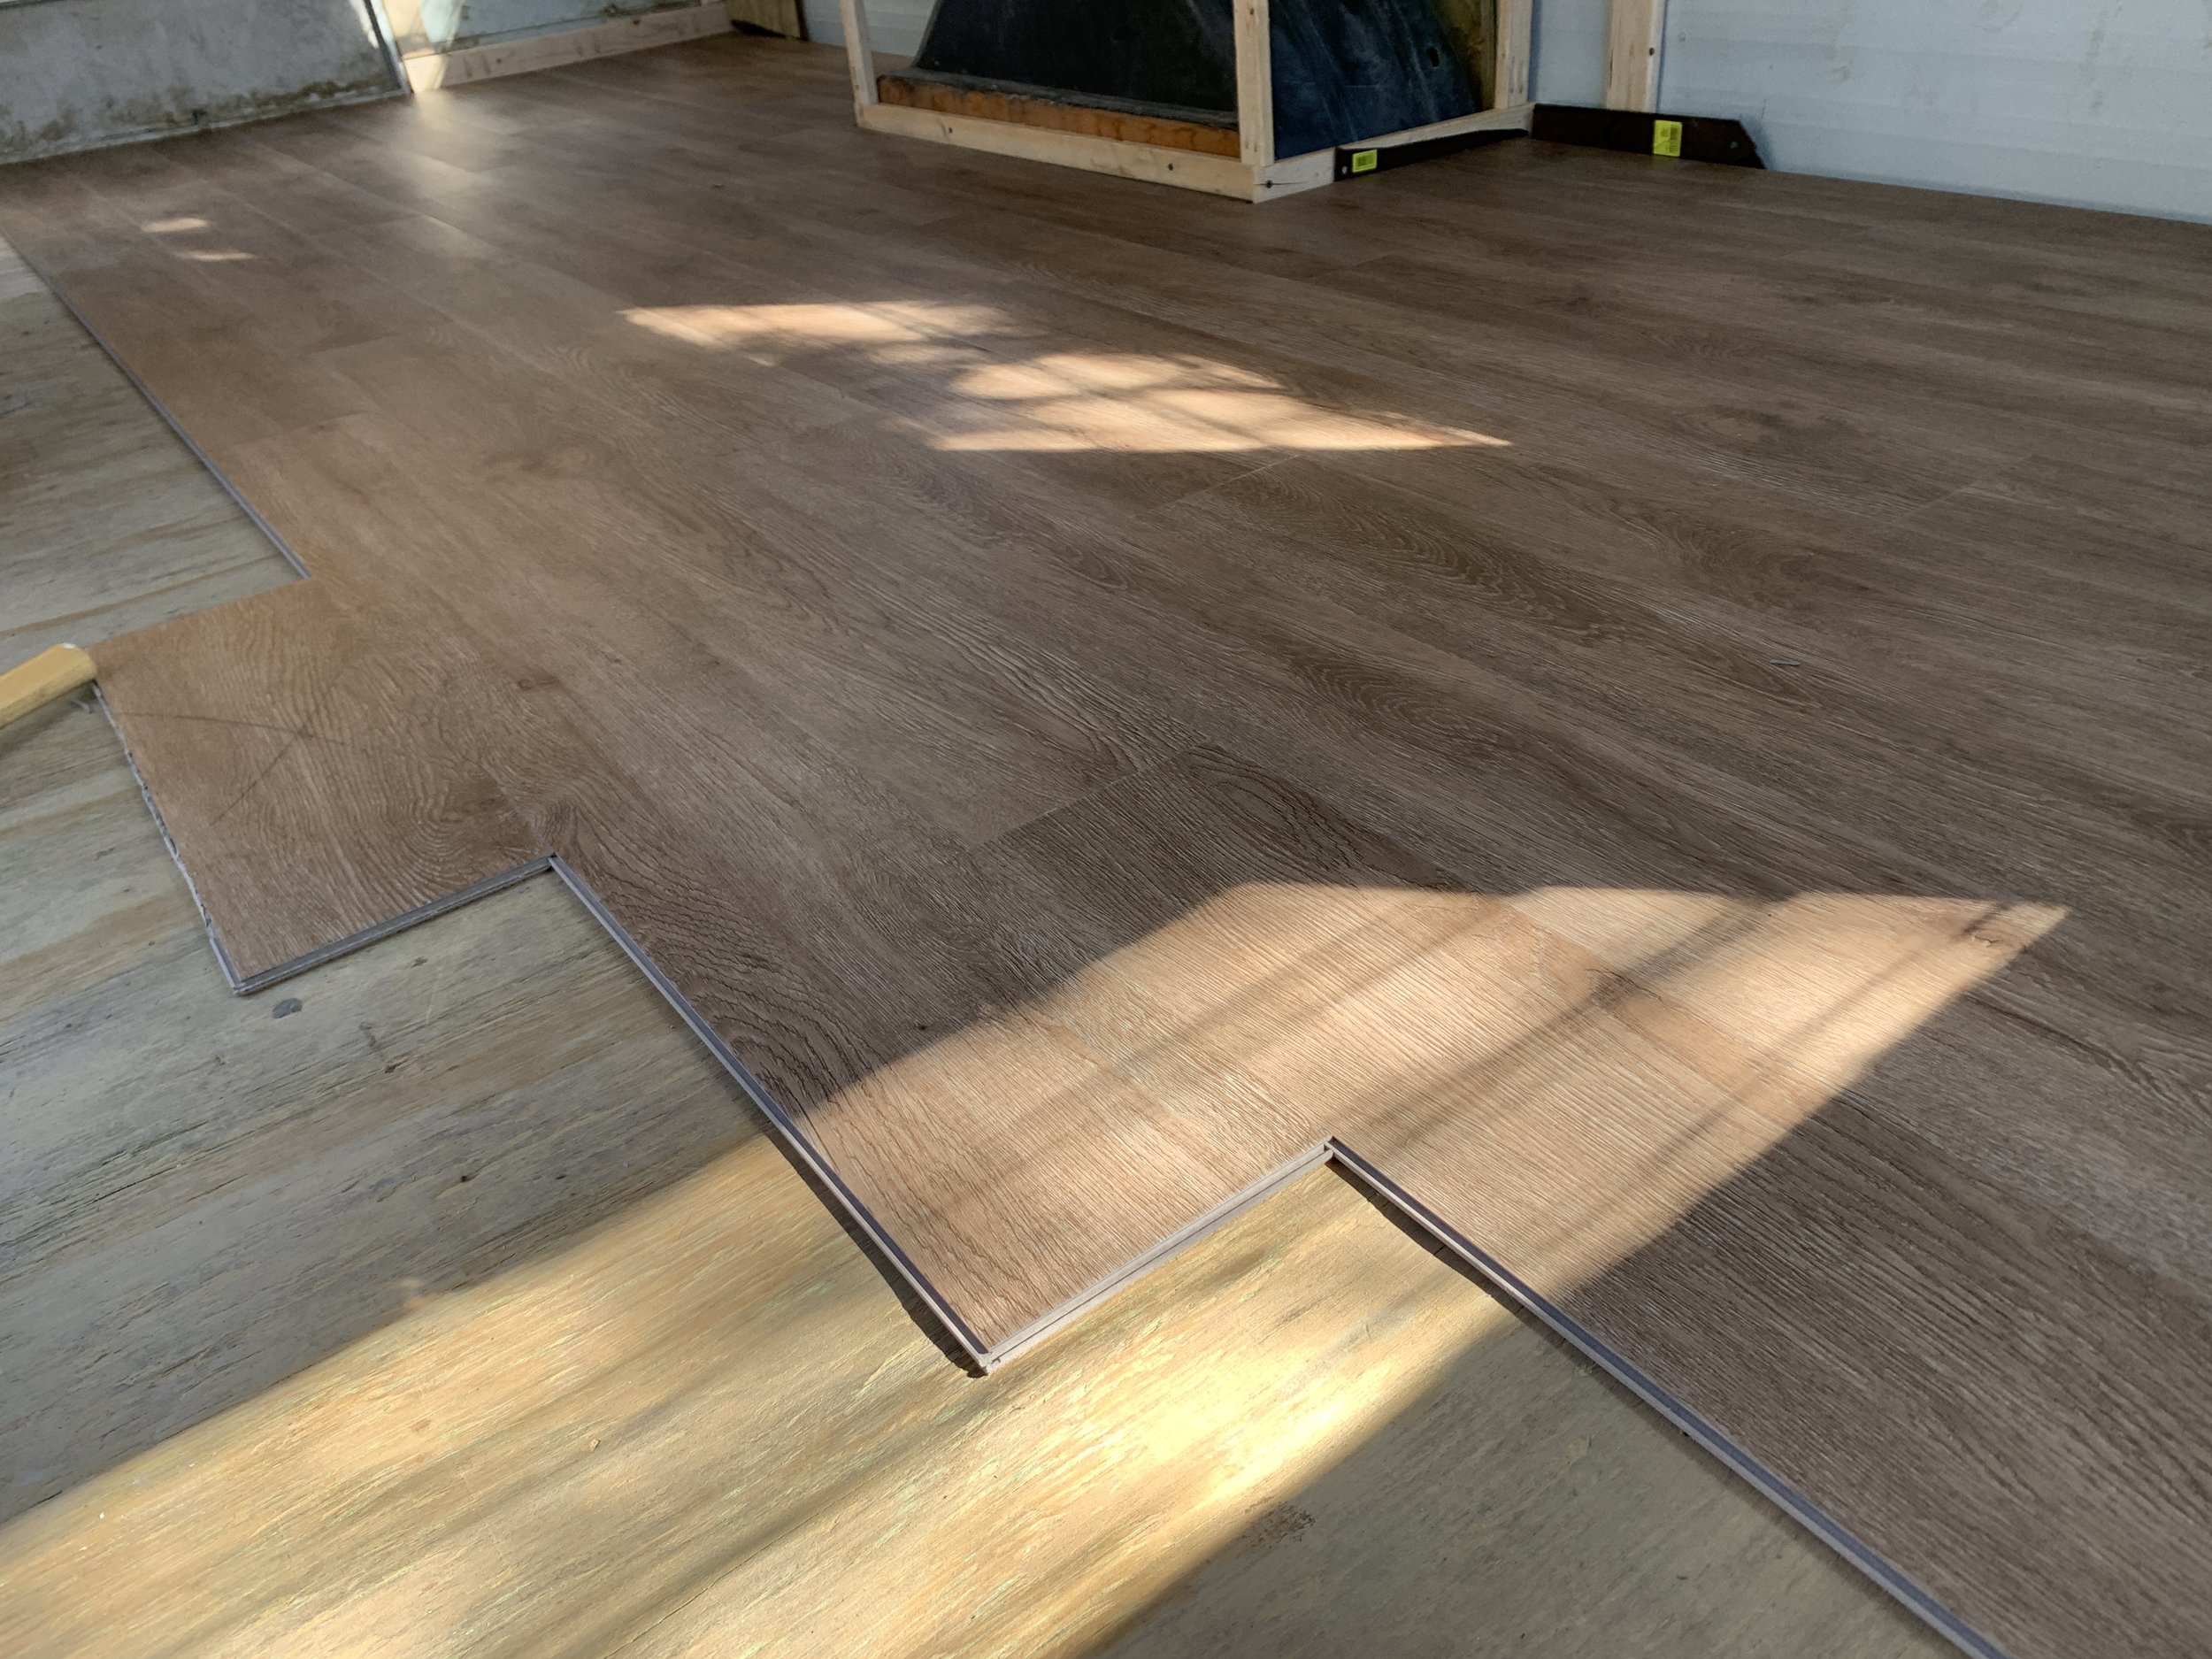 The Cameo Camper Renovation Why How We Installed Vinyl Plank Flooring Lone Oak Design Co